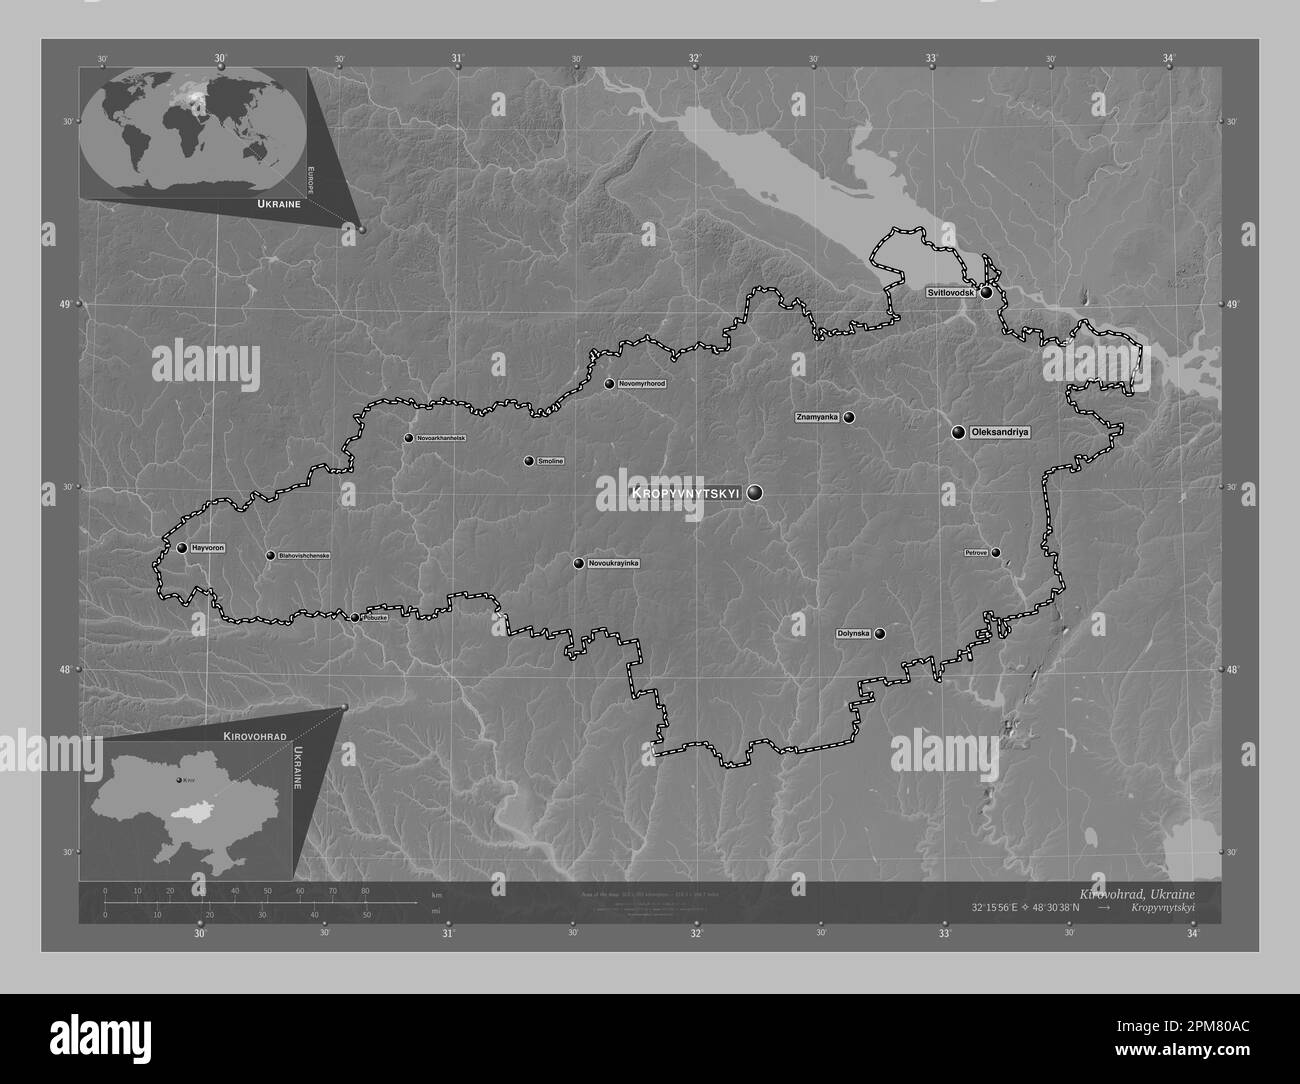 Kirovohrad, region of Ukraine. Grayscale elevation map with lakes and rivers. Locations and names of major cities of the region. Corner auxiliary loca Stock Photo